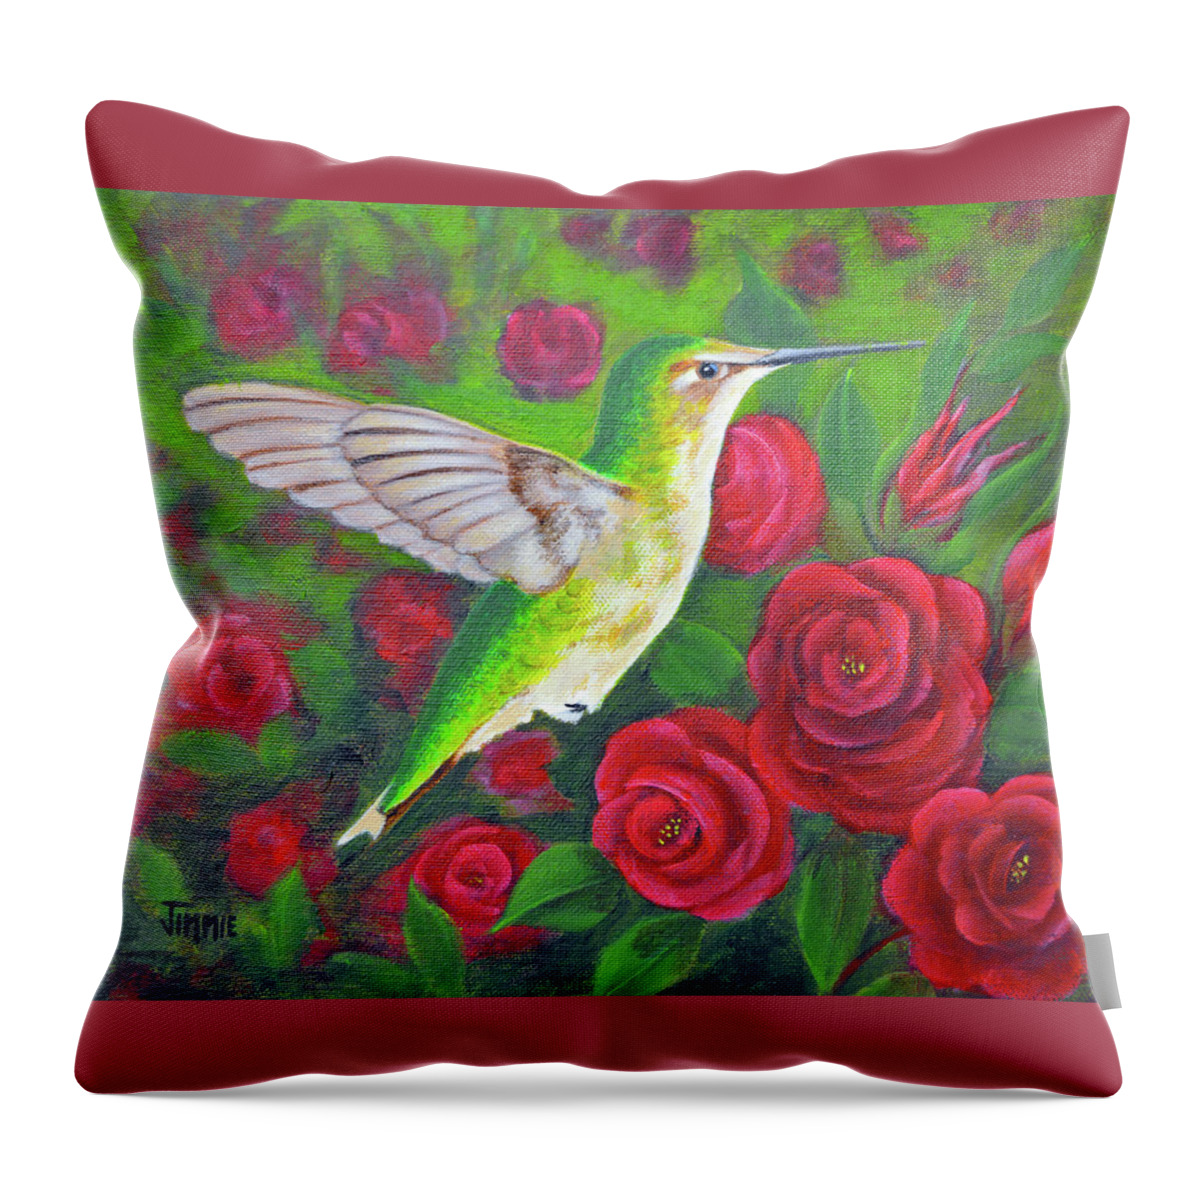 Hummingbird Throw Pillow featuring the painting Hummingbird and Roses by Jimmie Bartlett